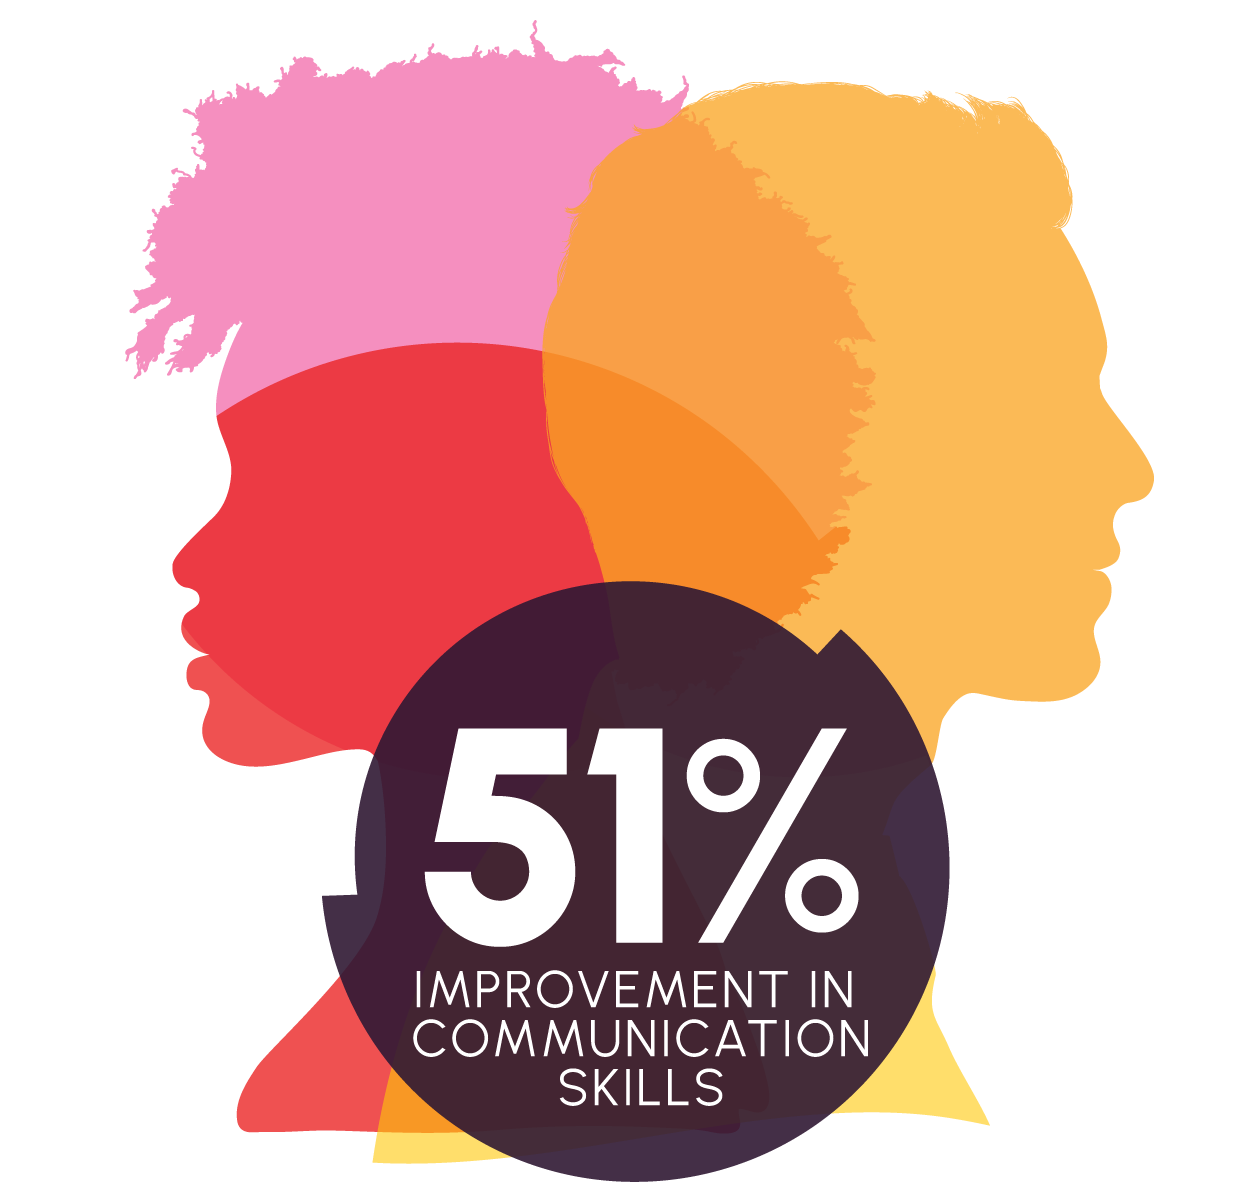 an ICF study shows that employees who engage with a worklife coach experience an improvement of 51 per cent in communication skills